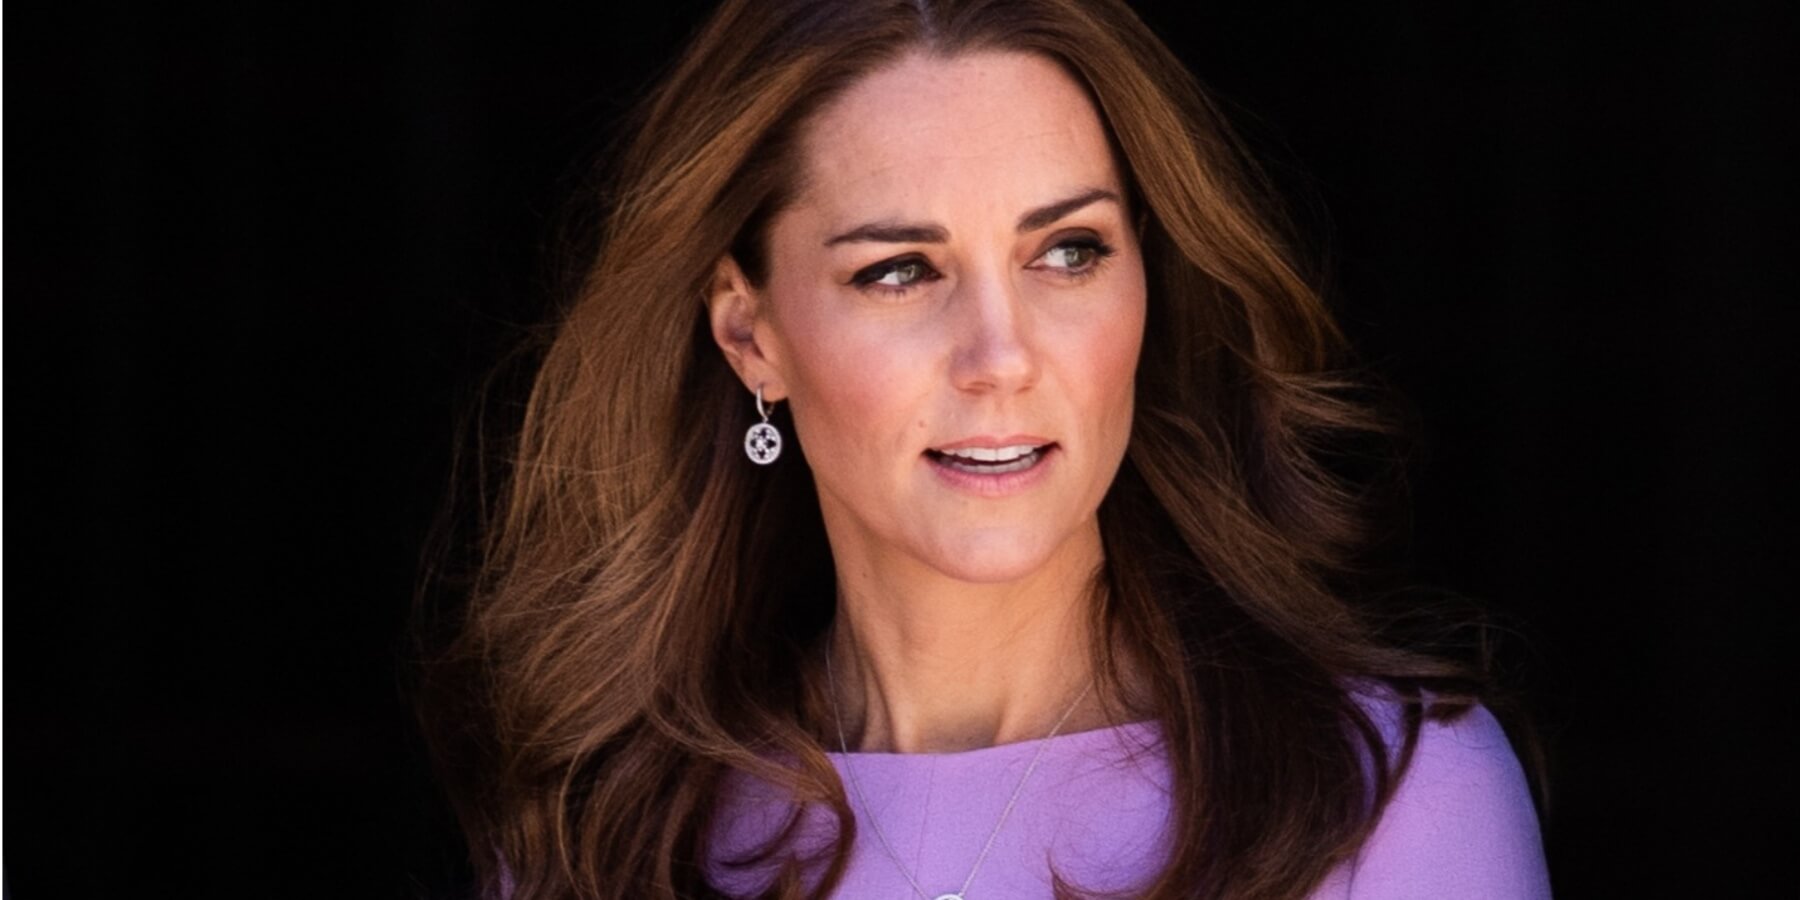 Kate Middleton was photographed at London County Hall on October 9, 2018, in London, England.